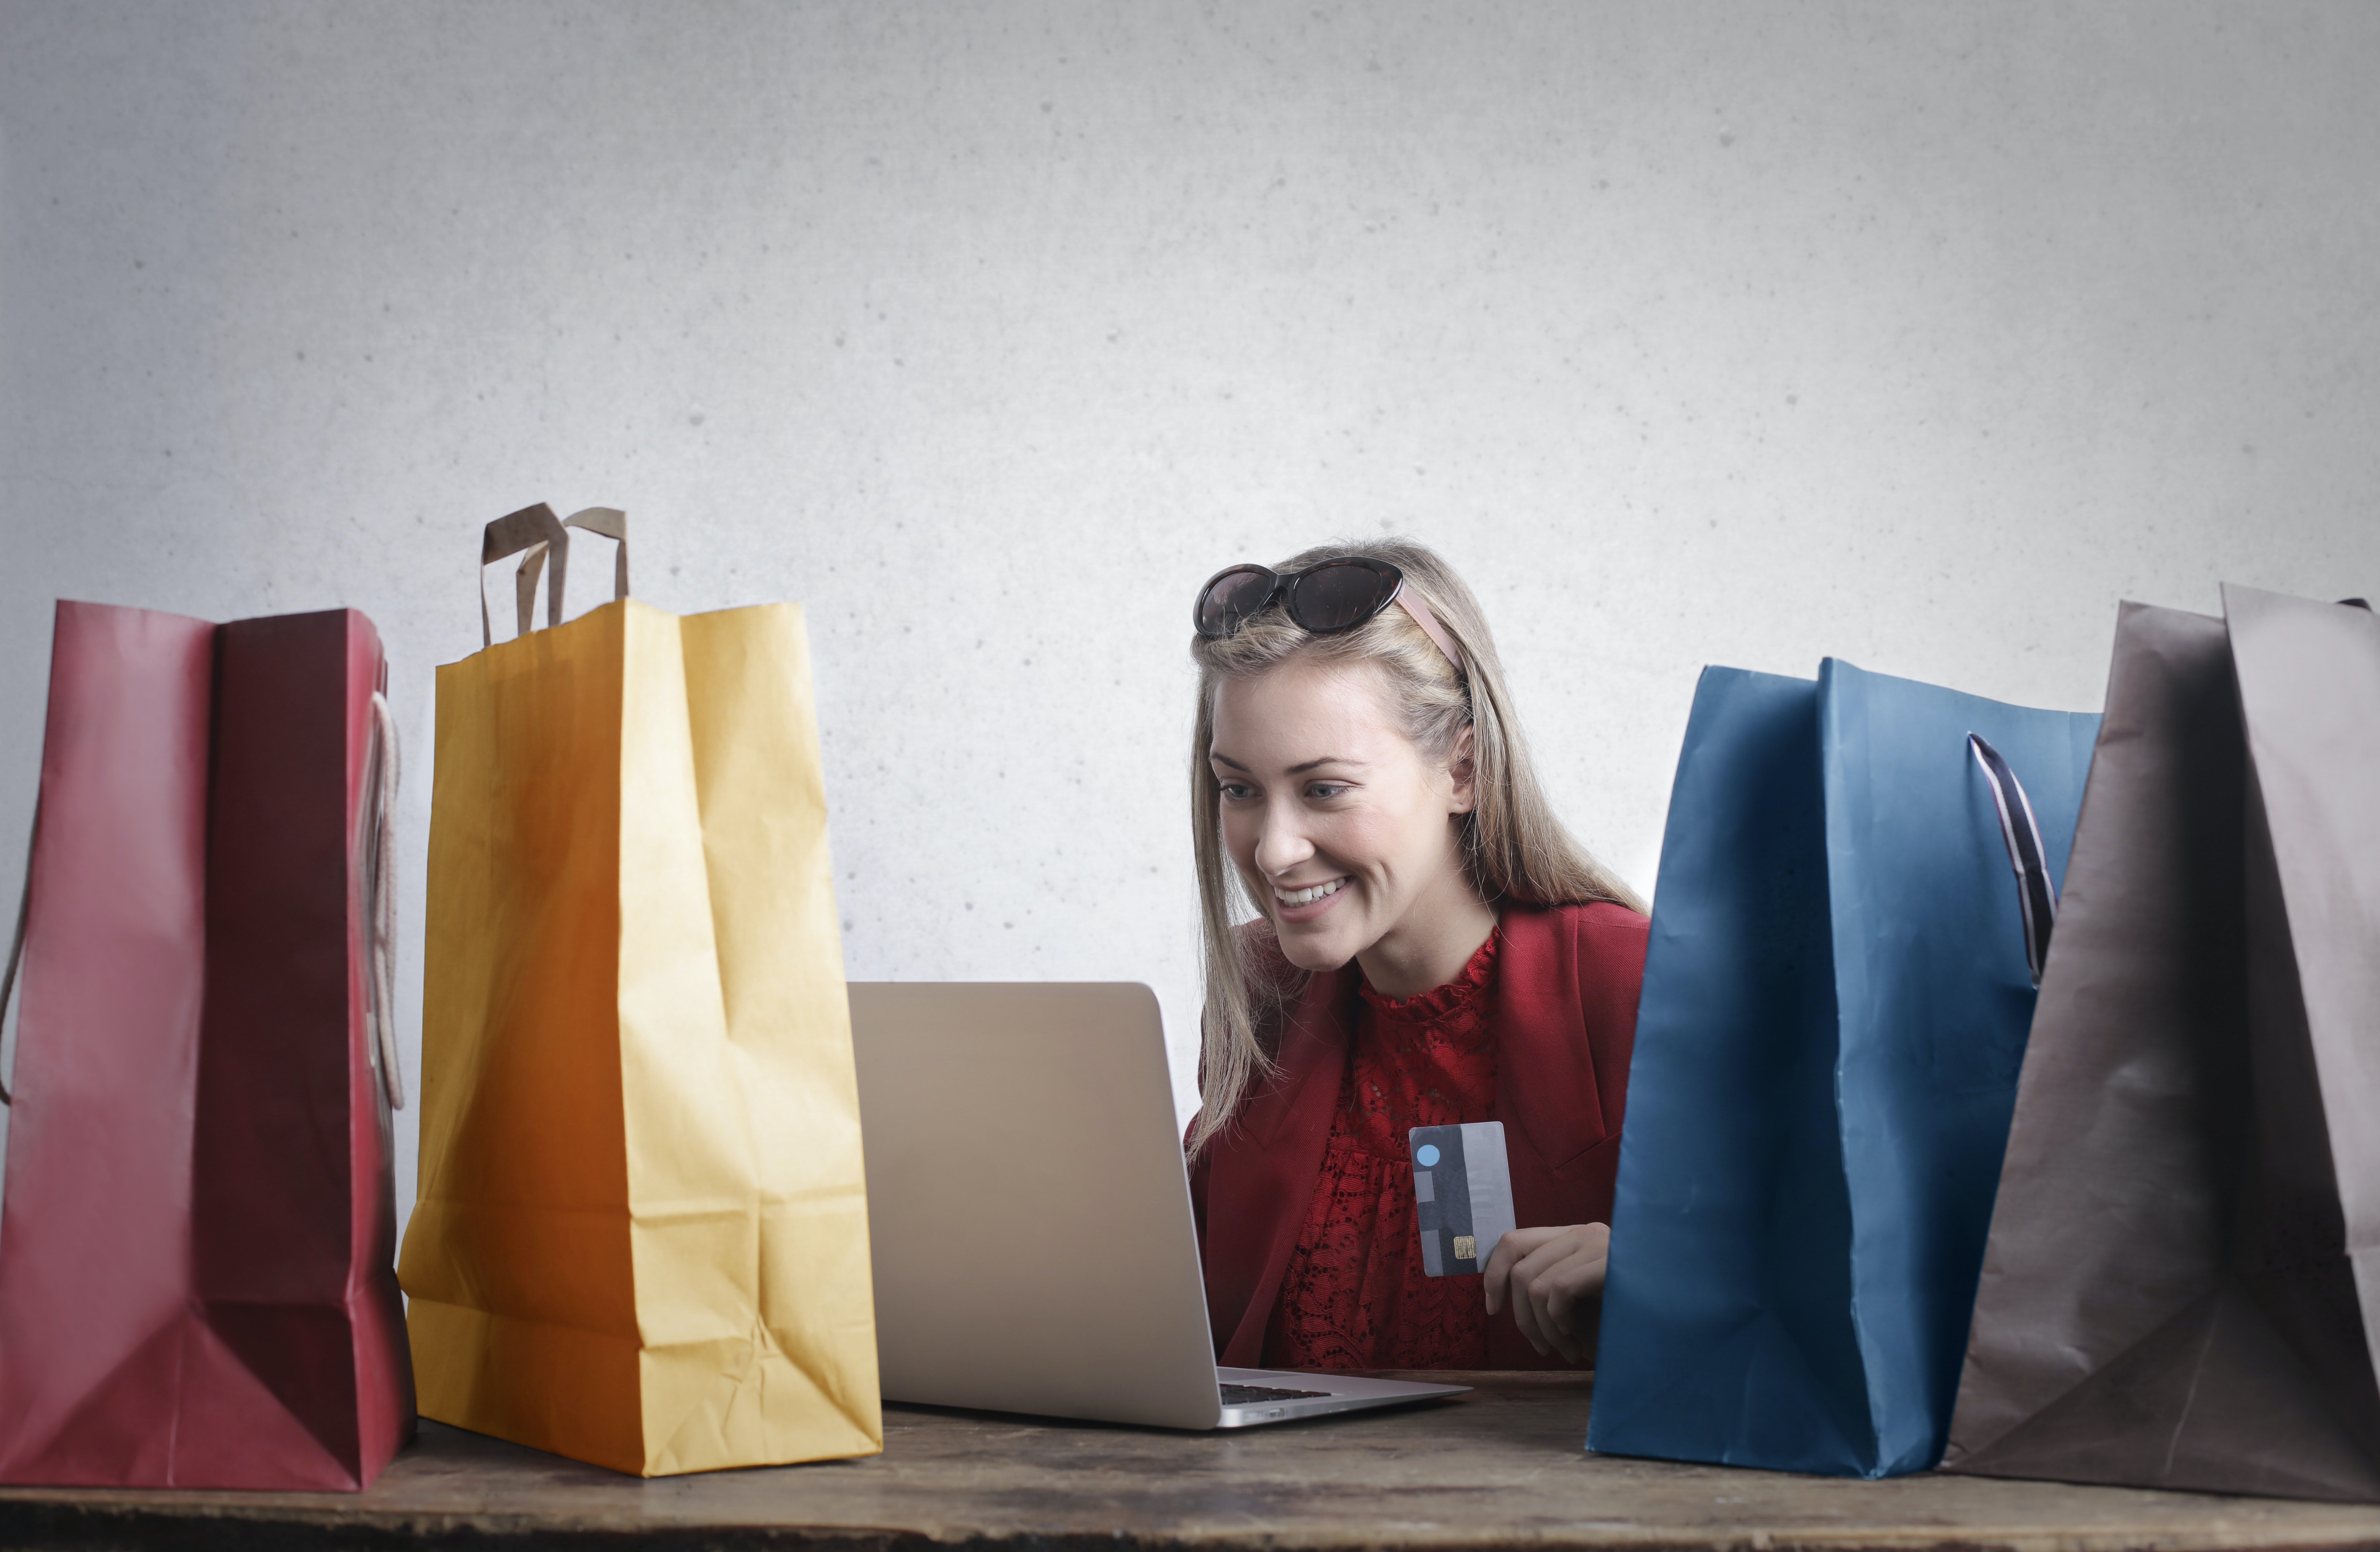 A happy woman shopping online at home posing alongside shopping bags | Source: Pexels 